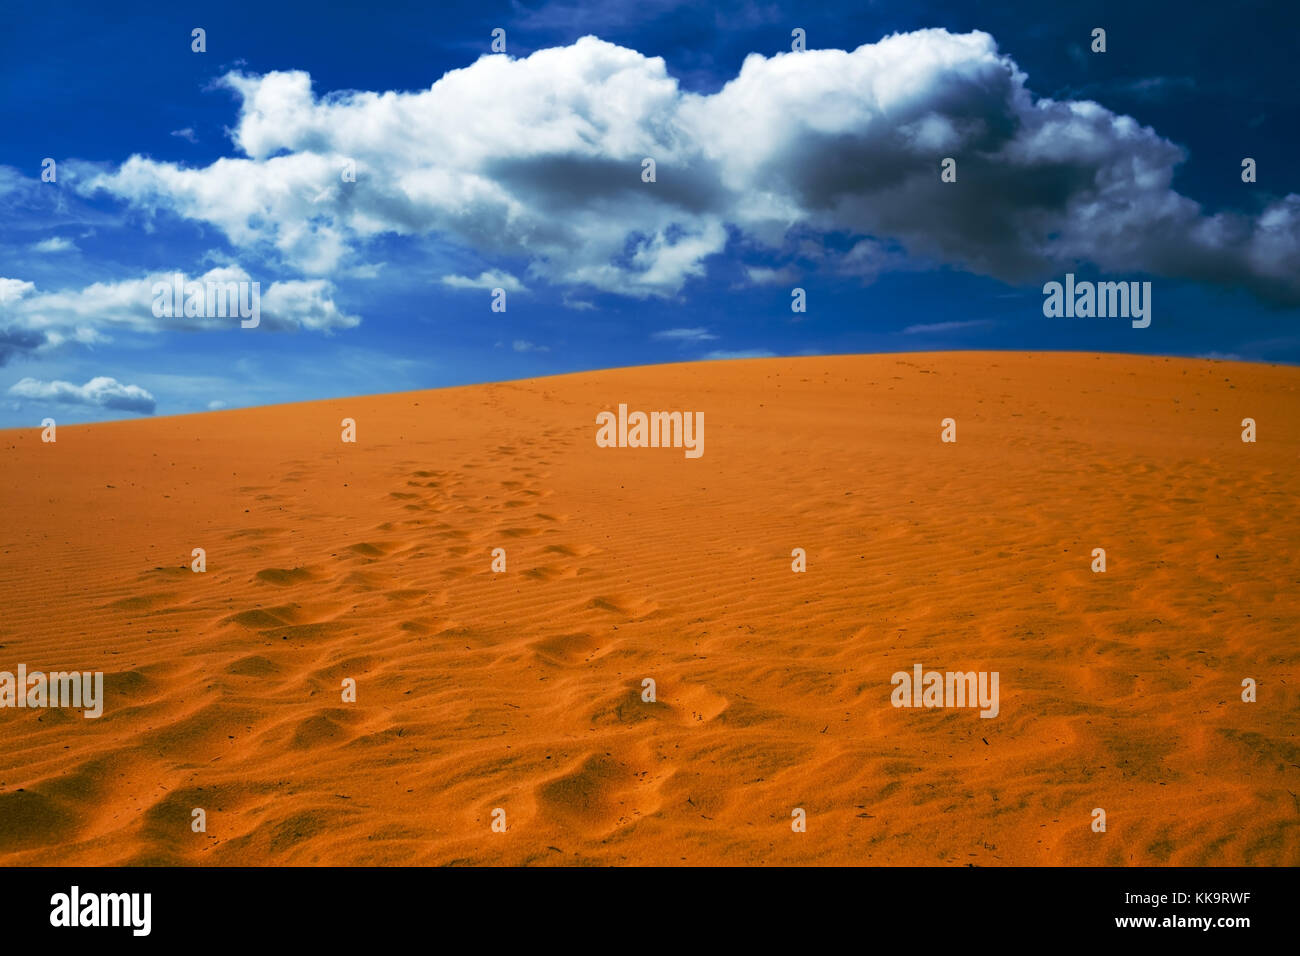 Bright yellow sand empties against the blue sky with clouds. Stock Photo